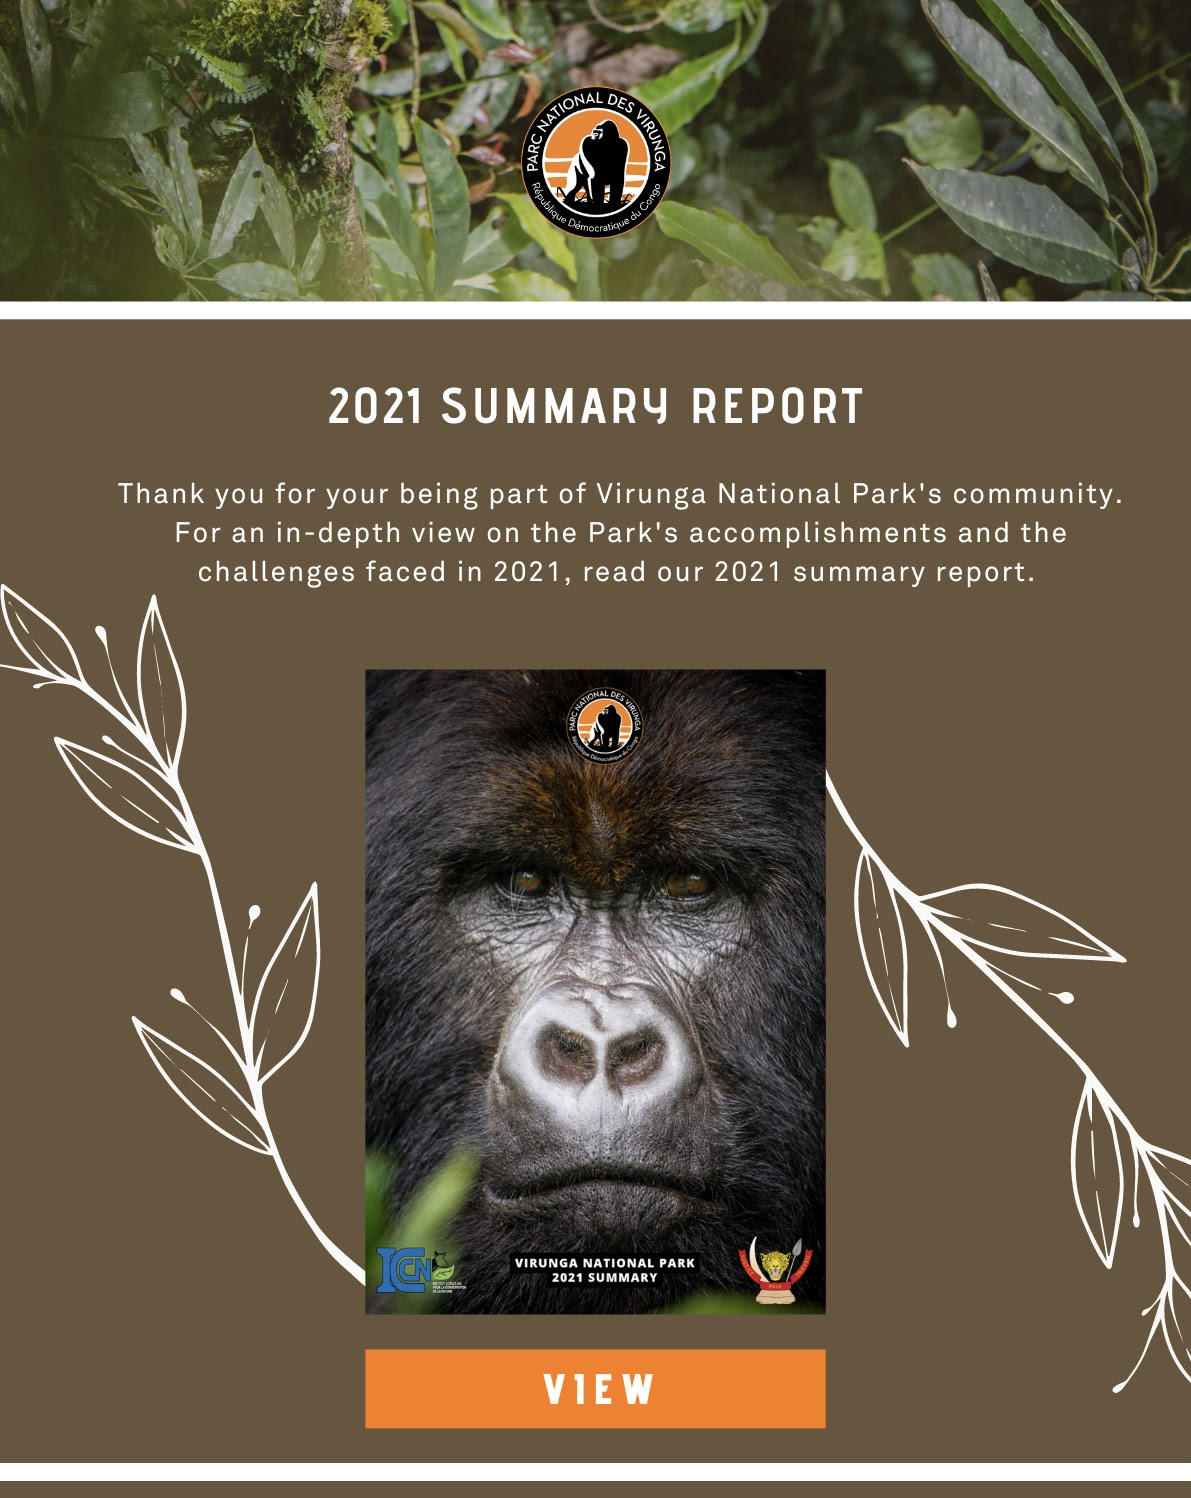 Thank you for your being part of our community. For an in-depth view on the Park's accomplishments and the challenges faced in 2021, read our 2021 summary report.